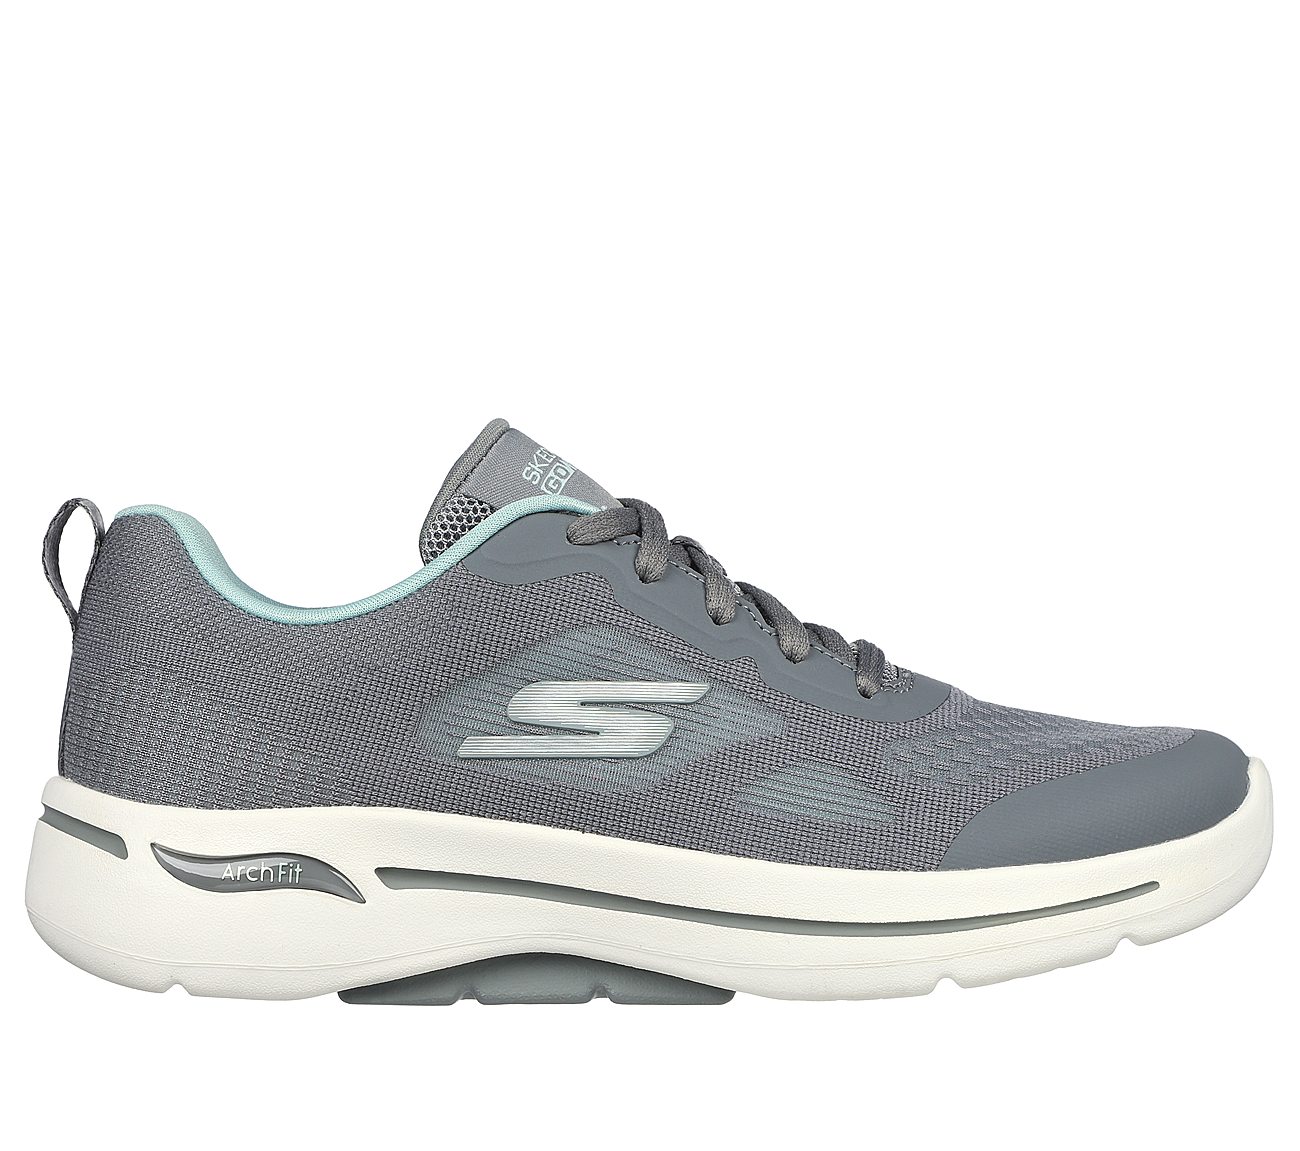 Skechers Grey/Aqua Go Walk Arch Fit F Womens Lace Up Shoes - Style ID ...